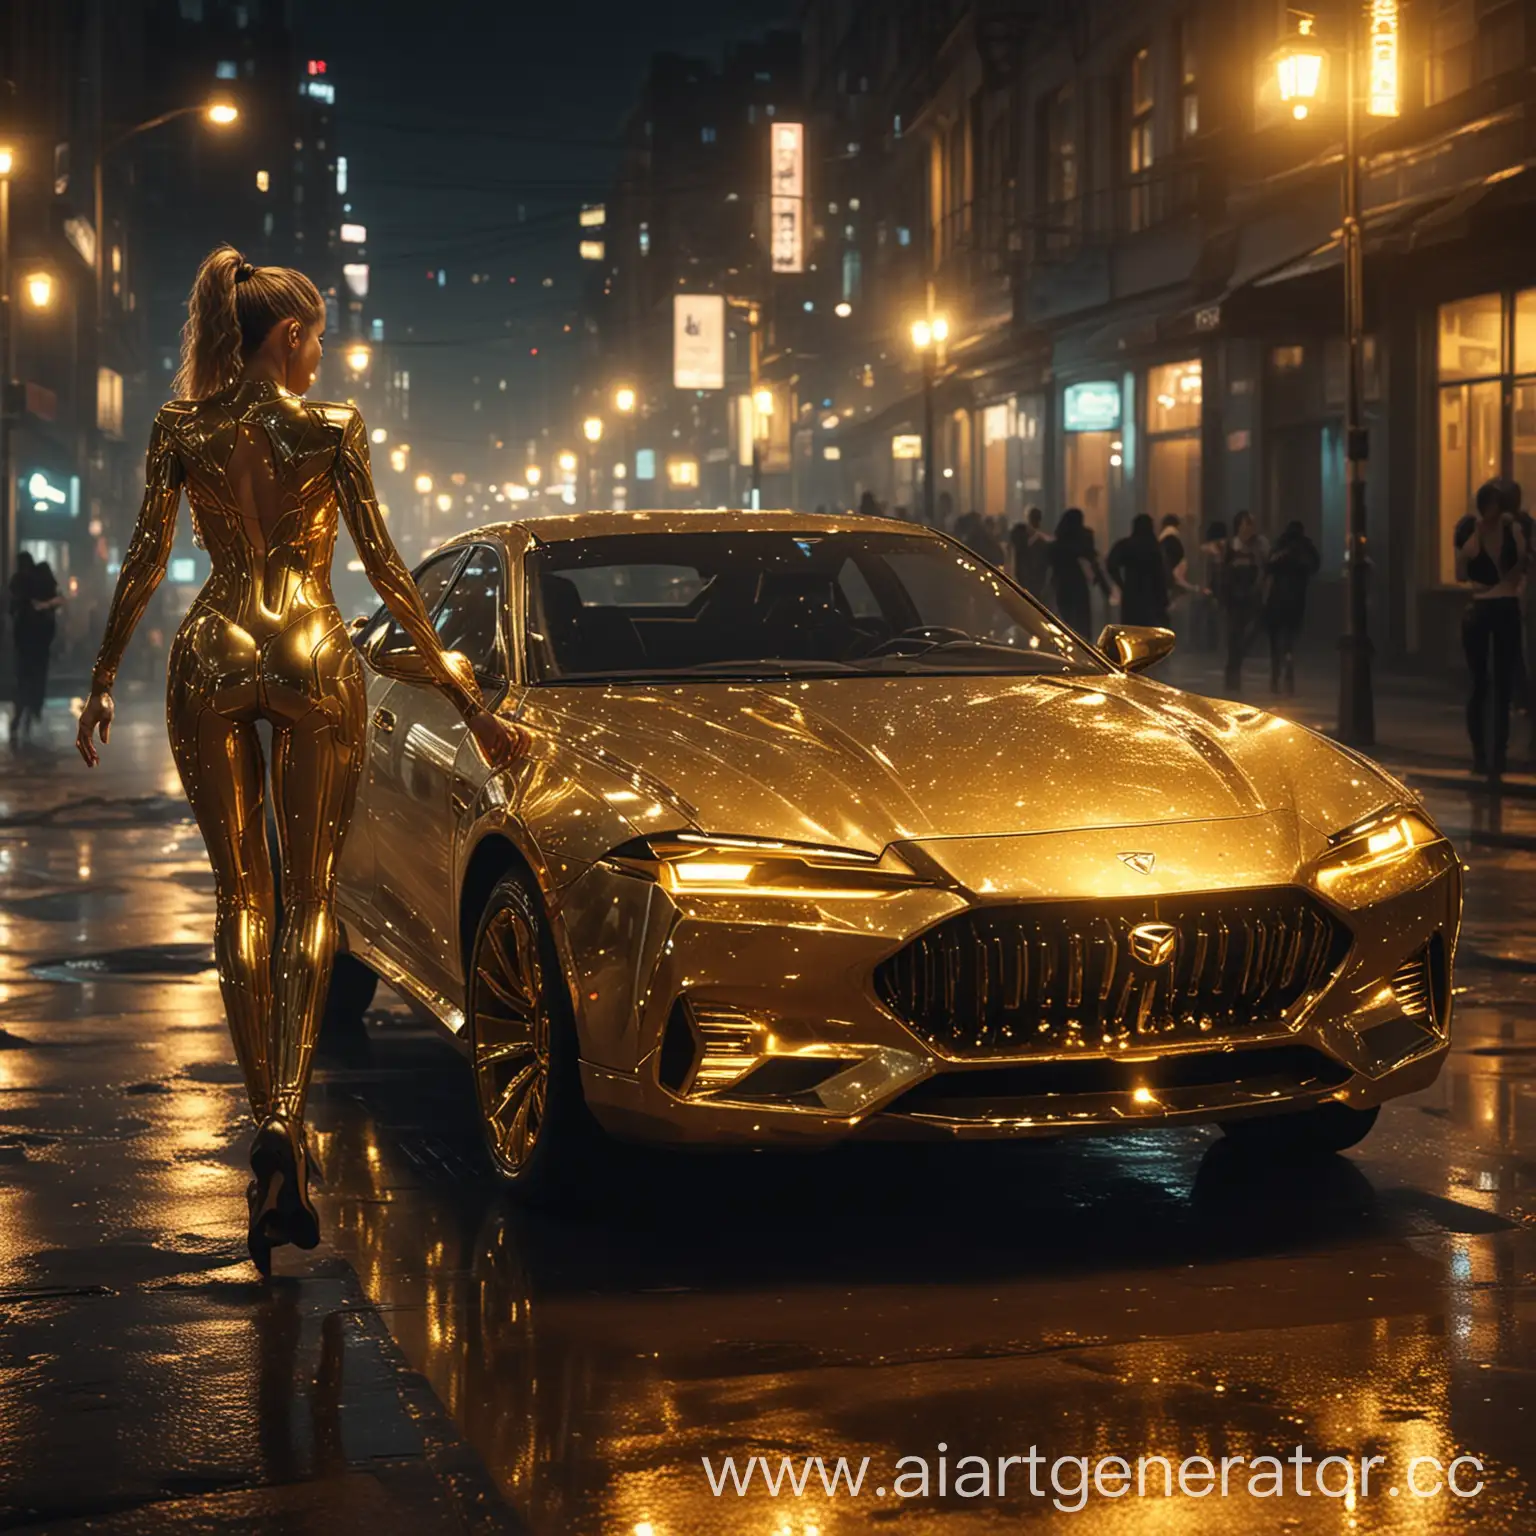 night. city. gold car drives along the road. cyberpunk lights. glow around. two girls dance in gold